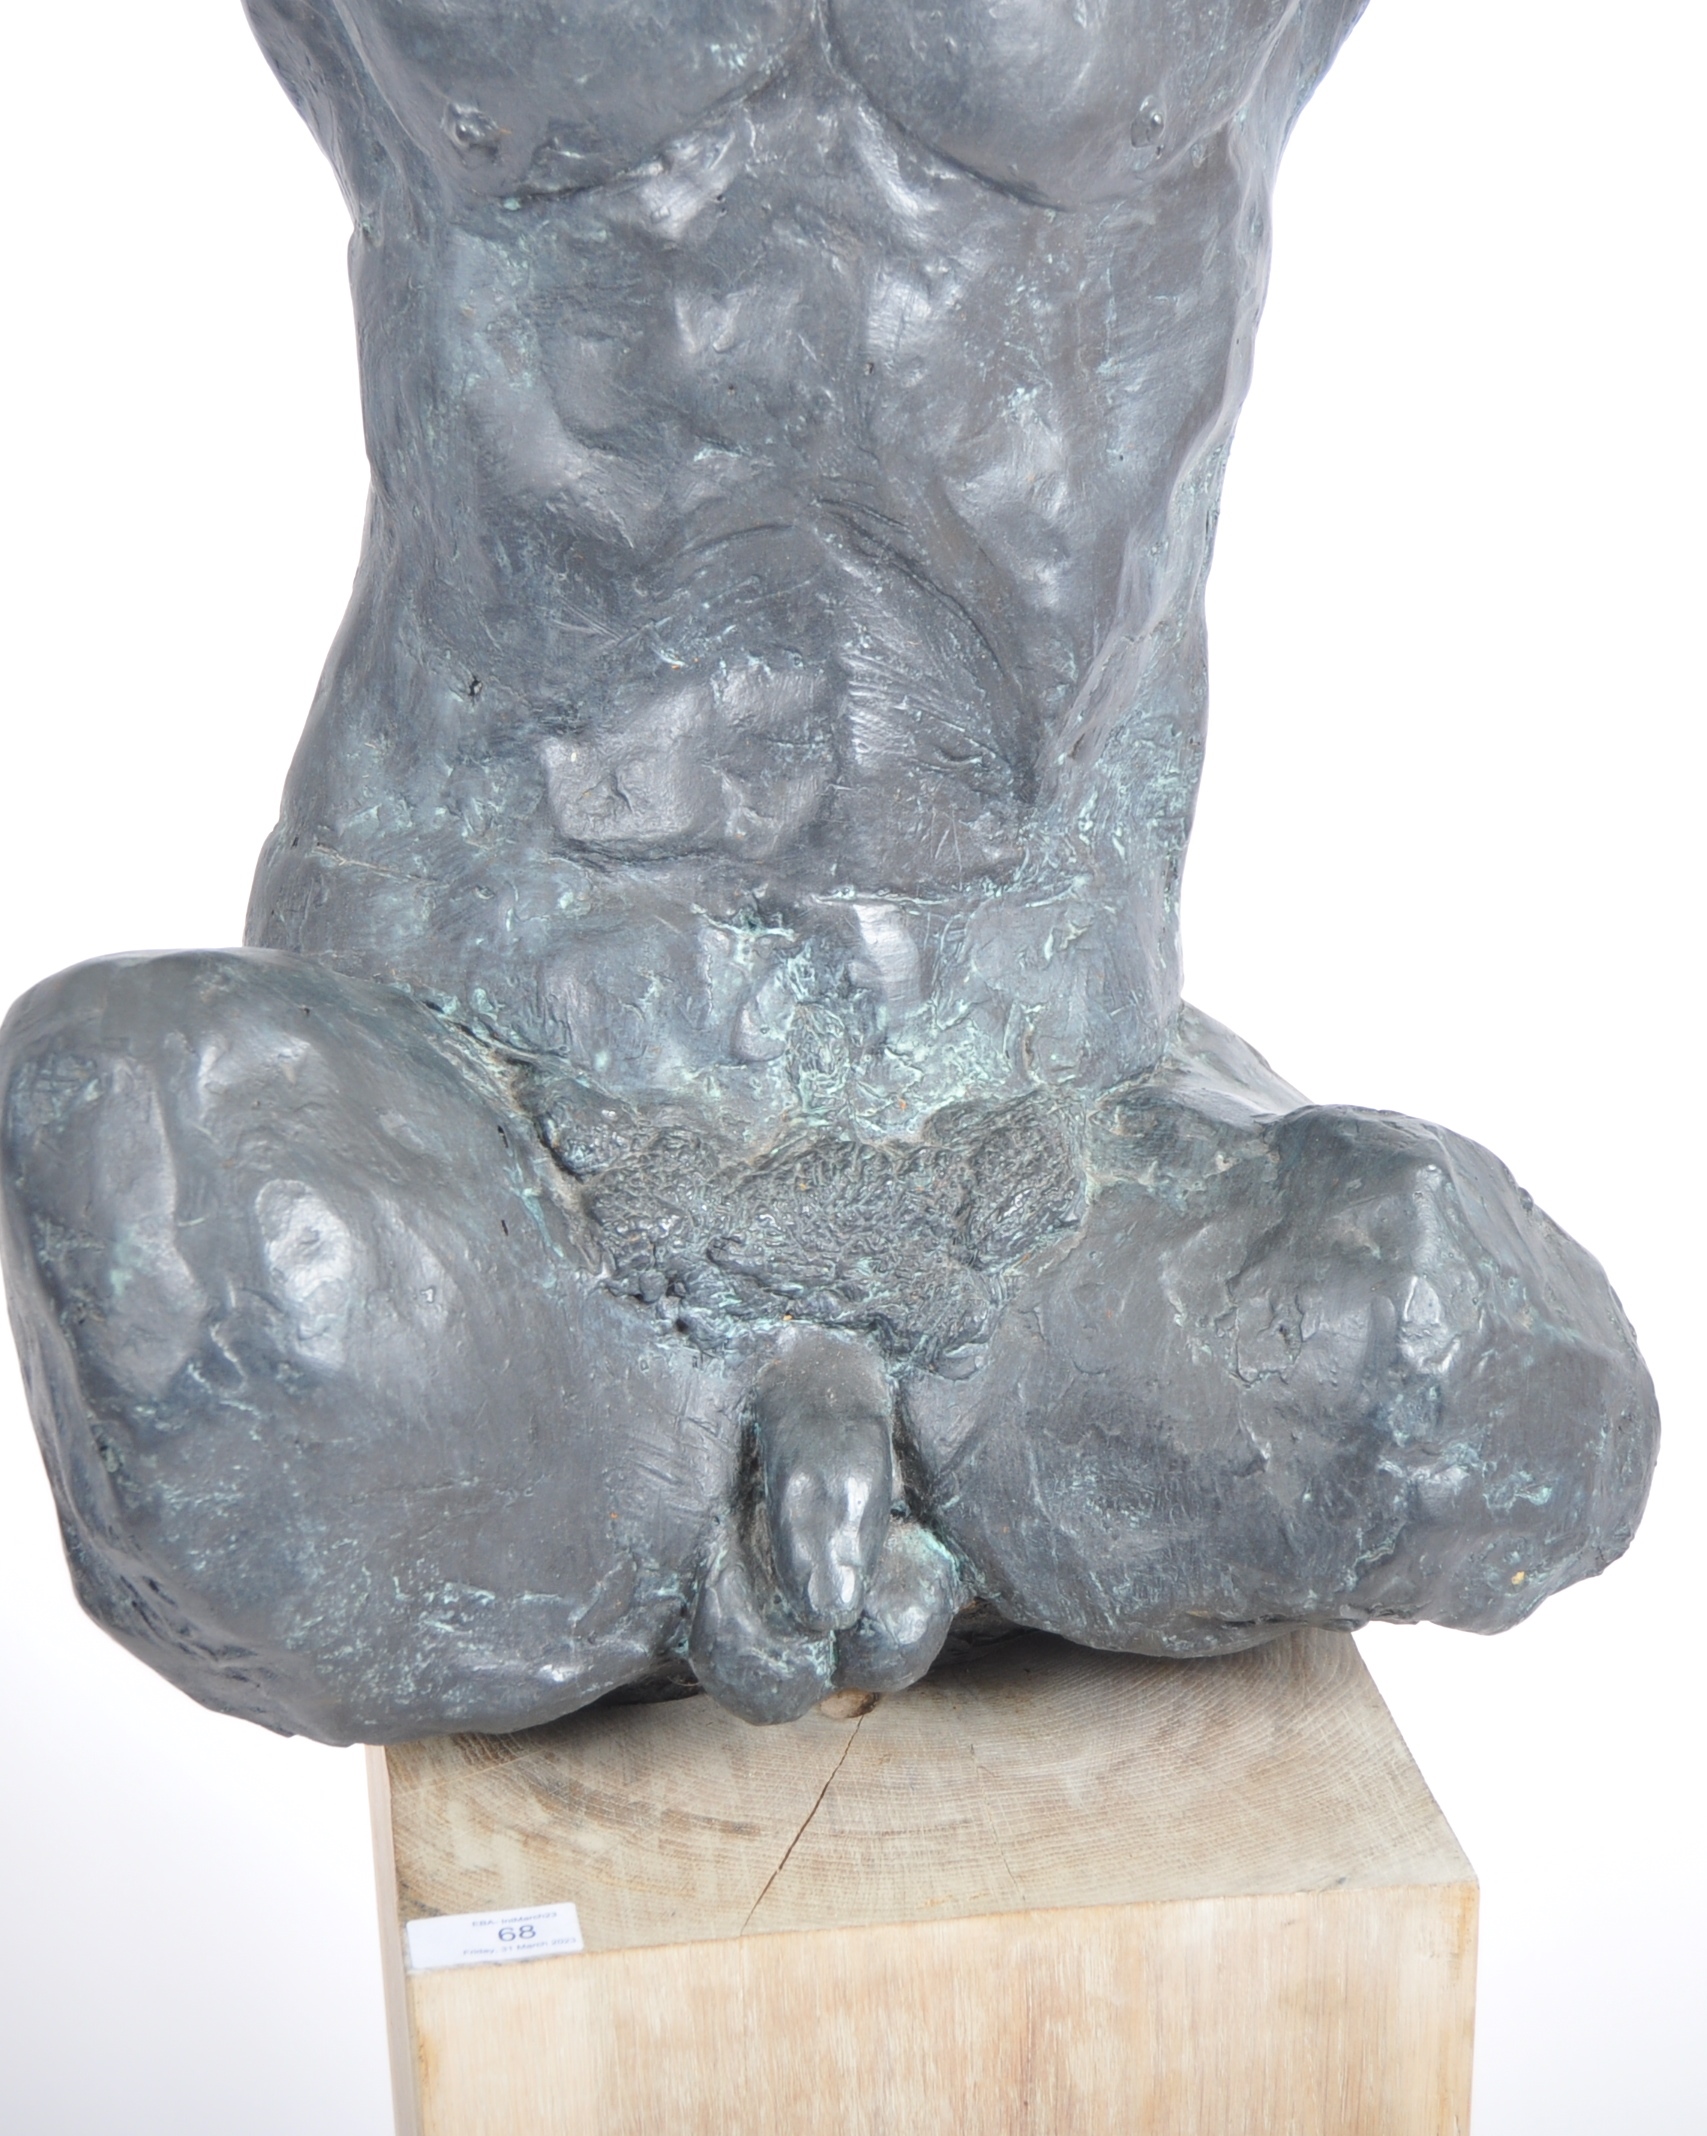 LARGE CONTEMPORARY PLASTER SCULPTURE OF A MALE TORSO - Image 4 of 8